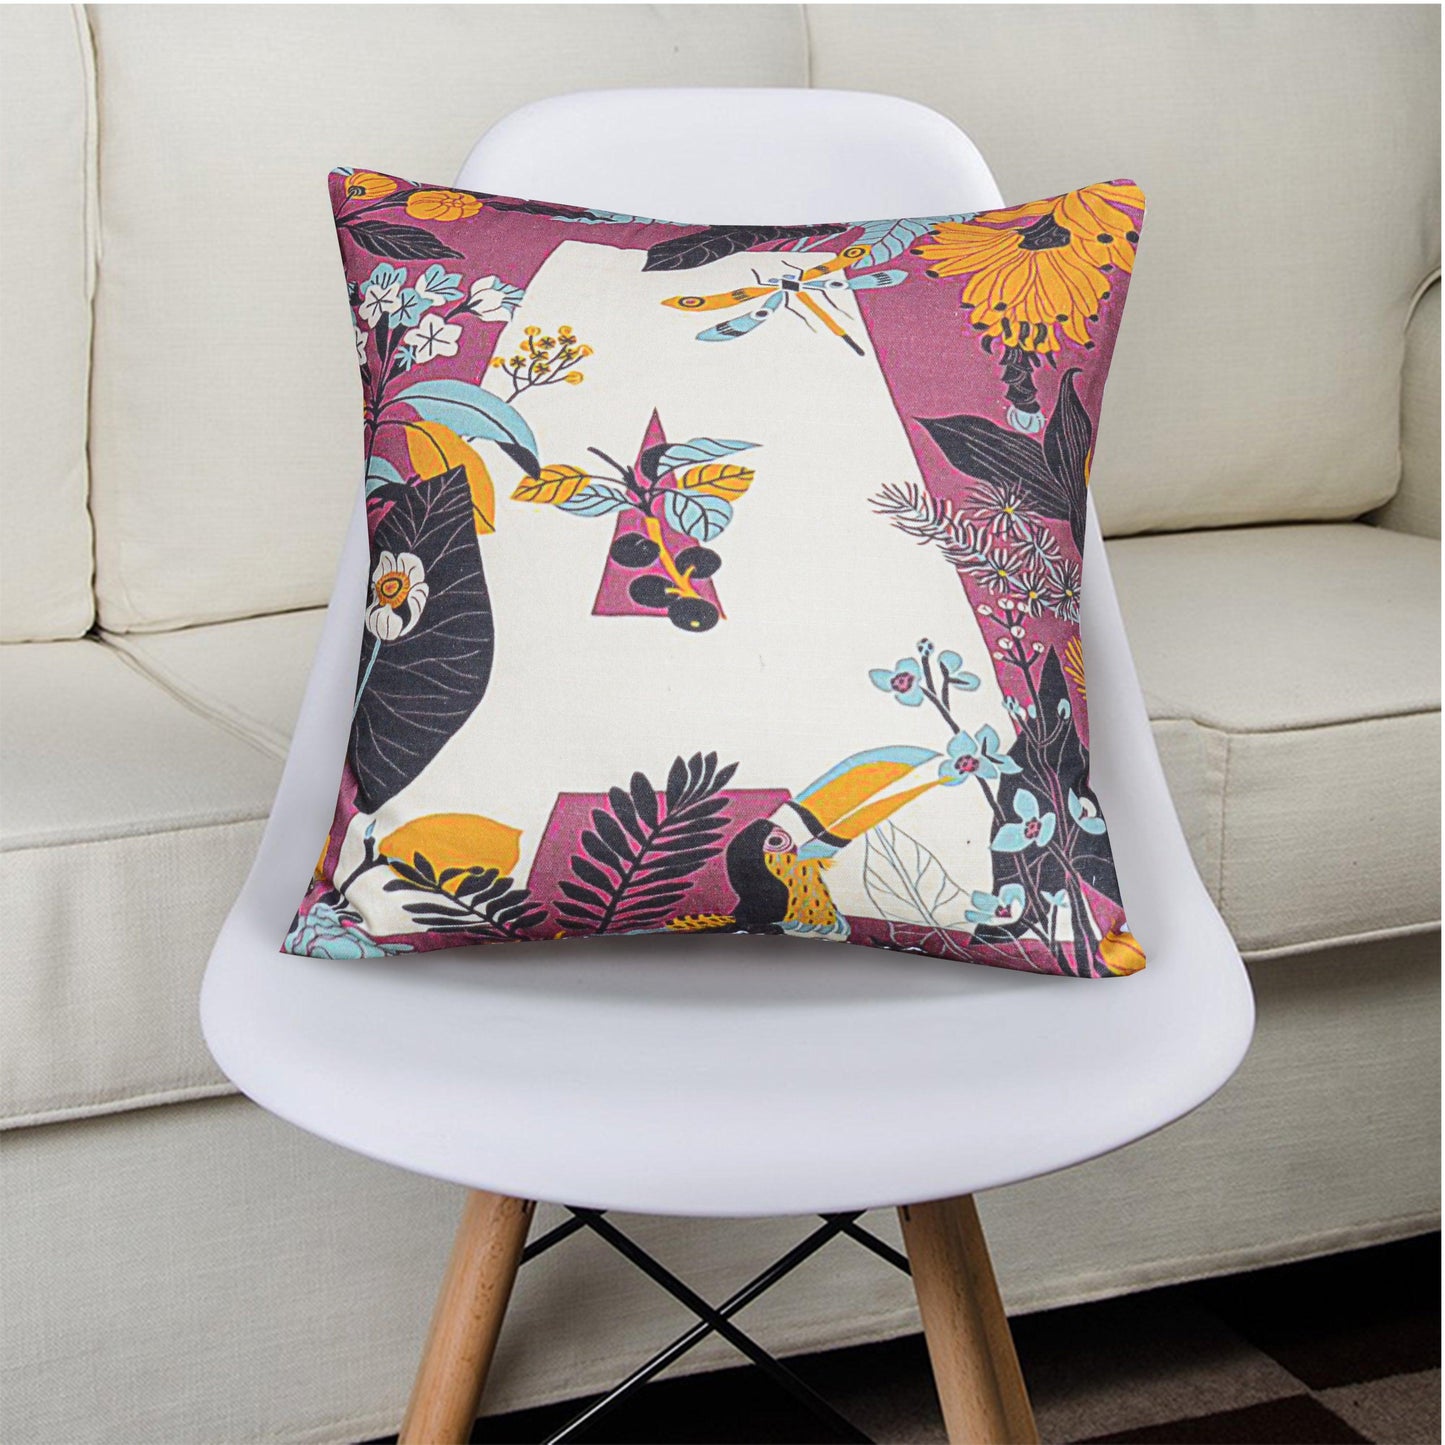 Pack of 5 Duck Digital Printed Cushion covers - 92Bedding